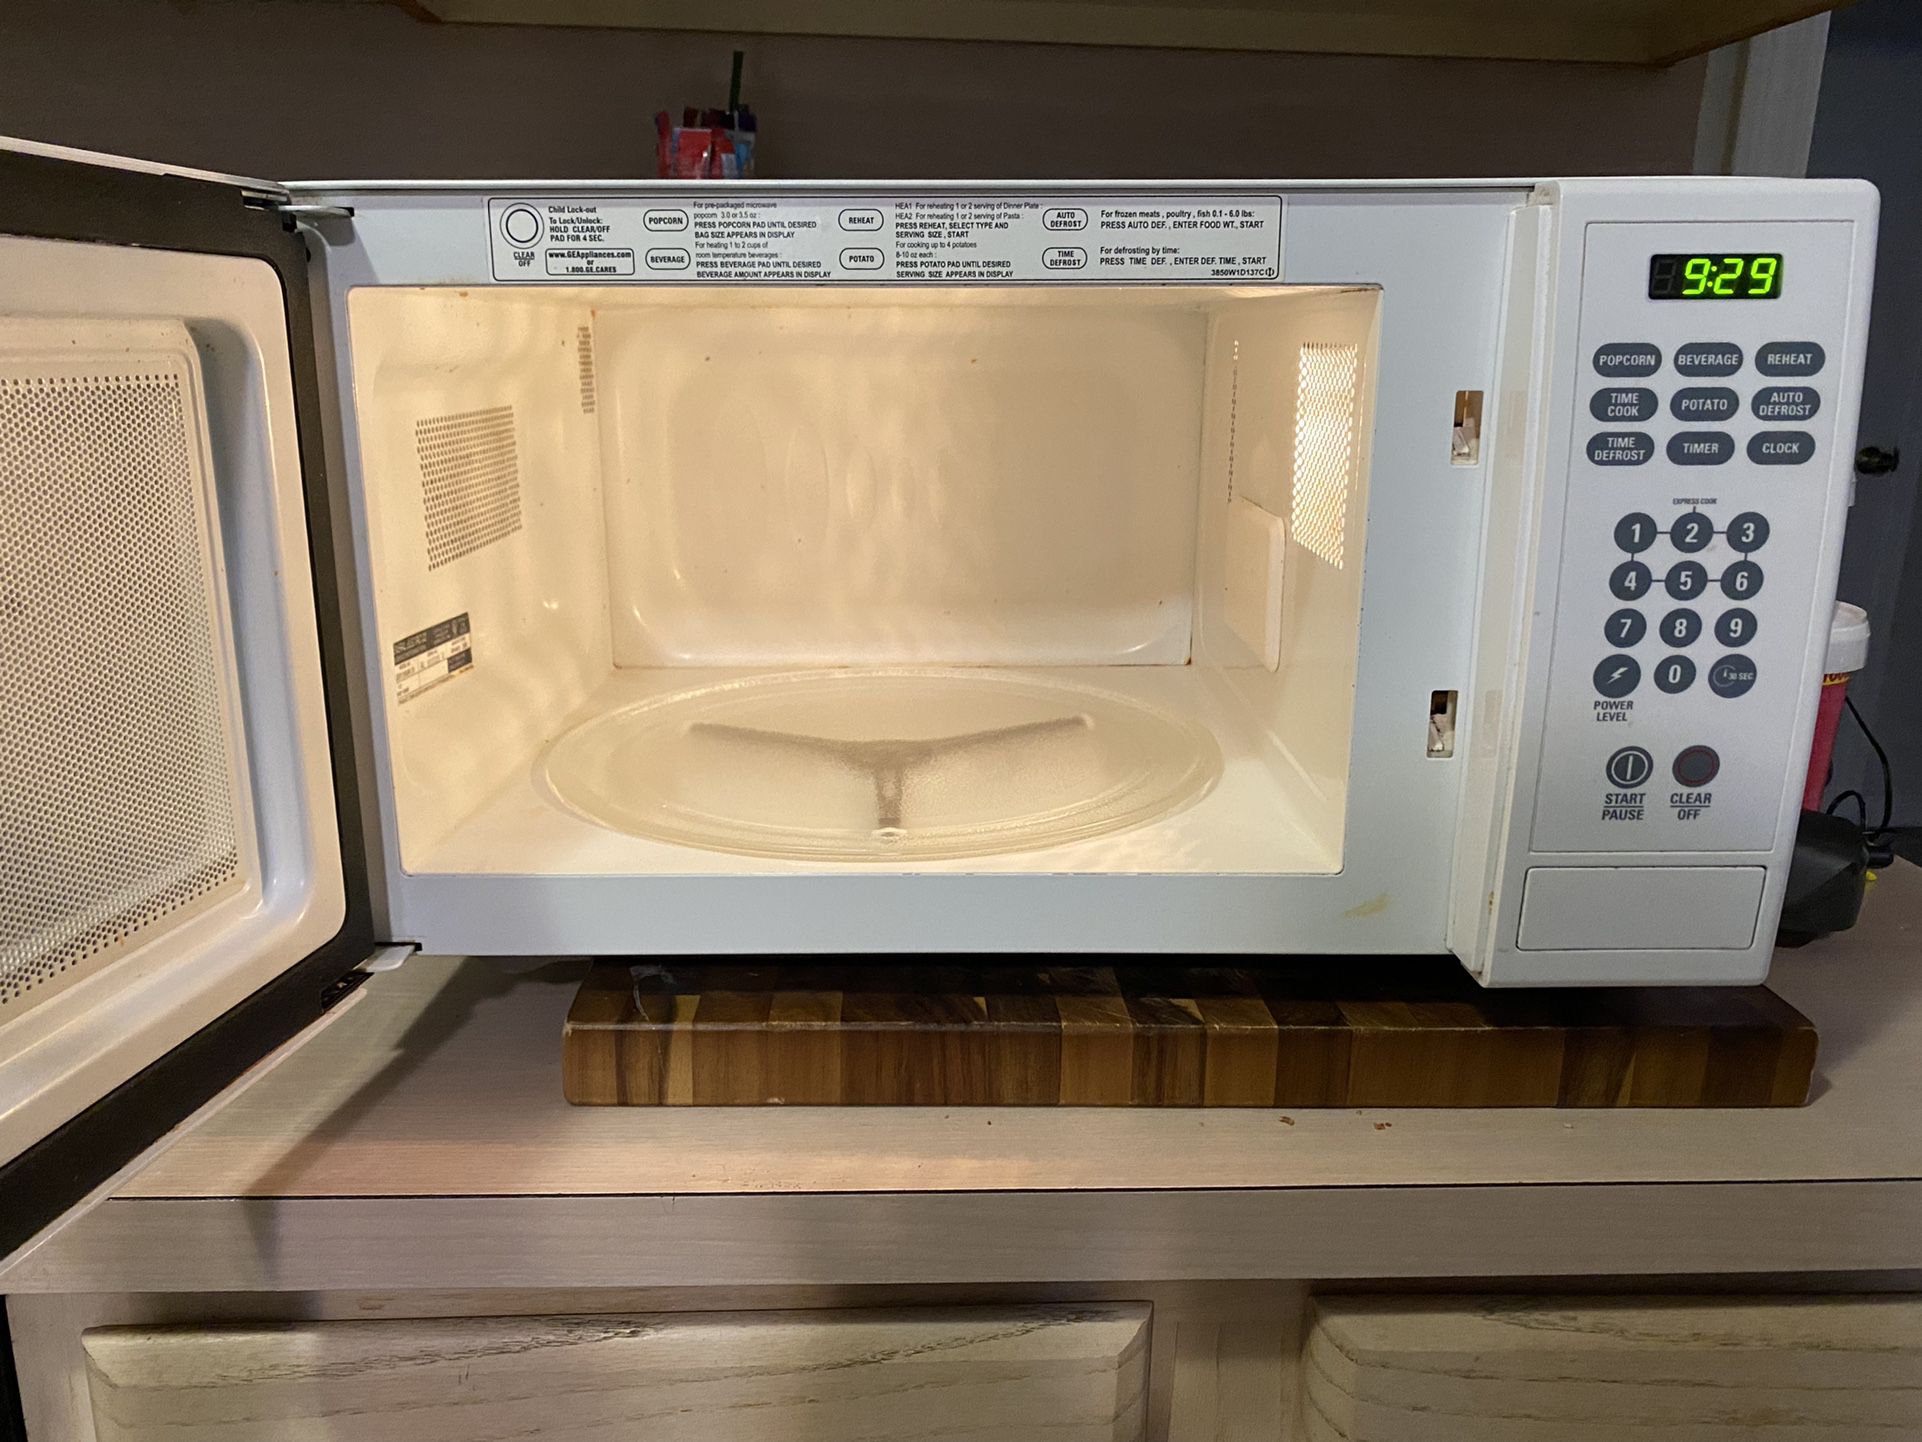 Space Saver Microwave Oven for Sale in Mesa, AZ - OfferUp